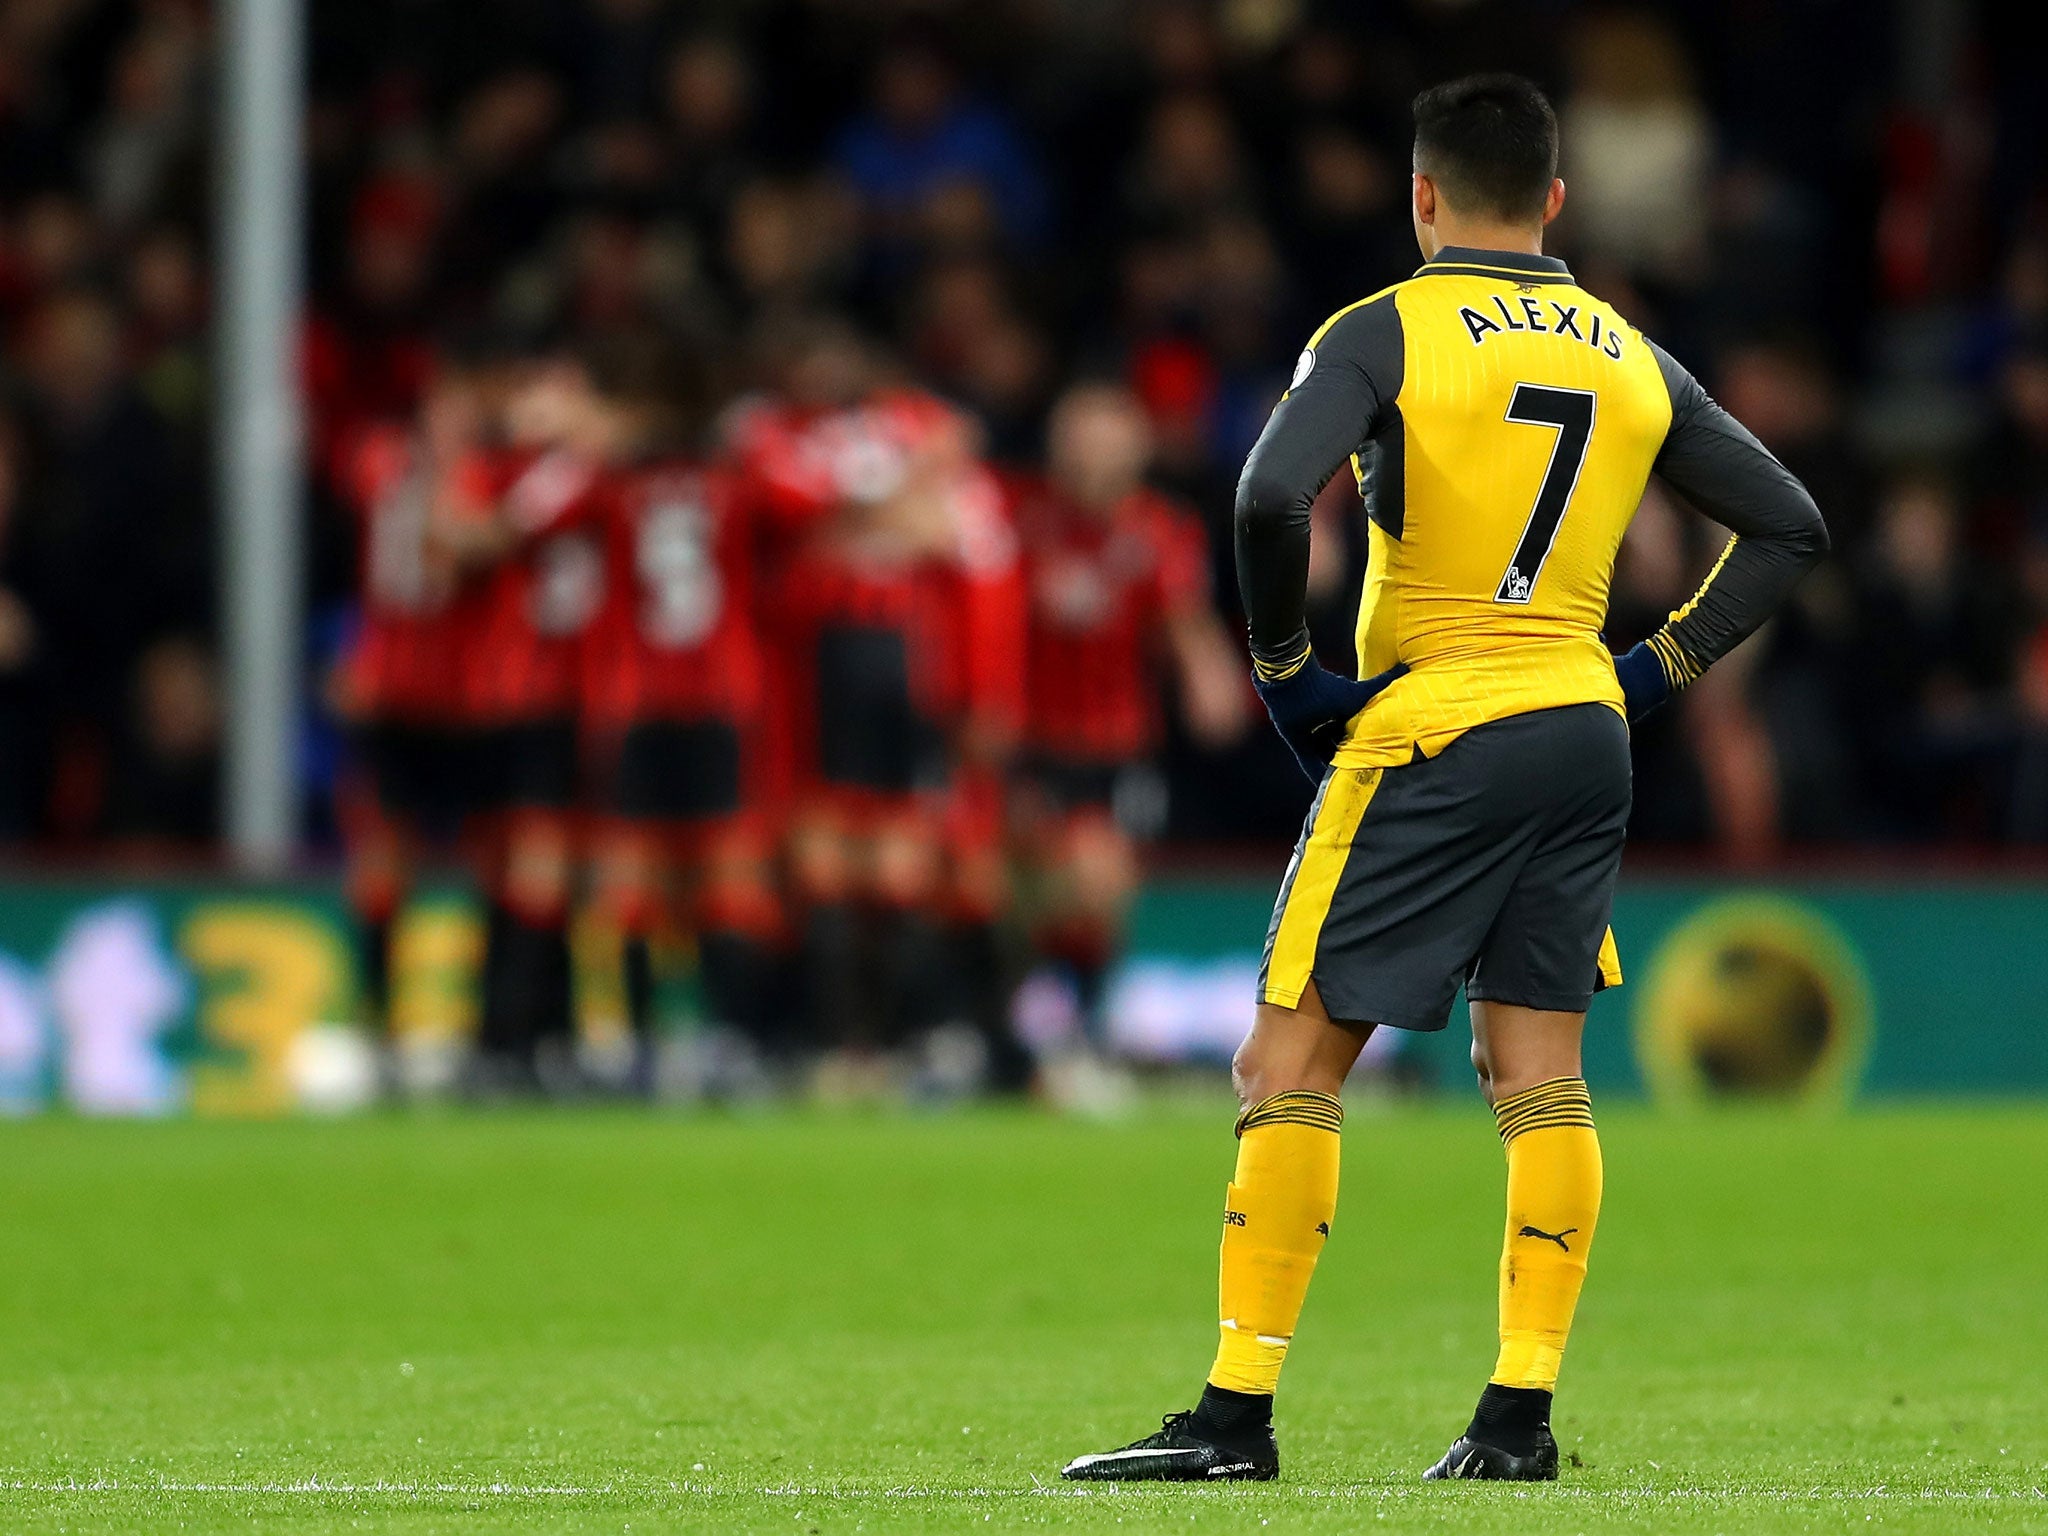 Sanchez was visibly frustrated after the final whistle at Dean Court on Tuesday night